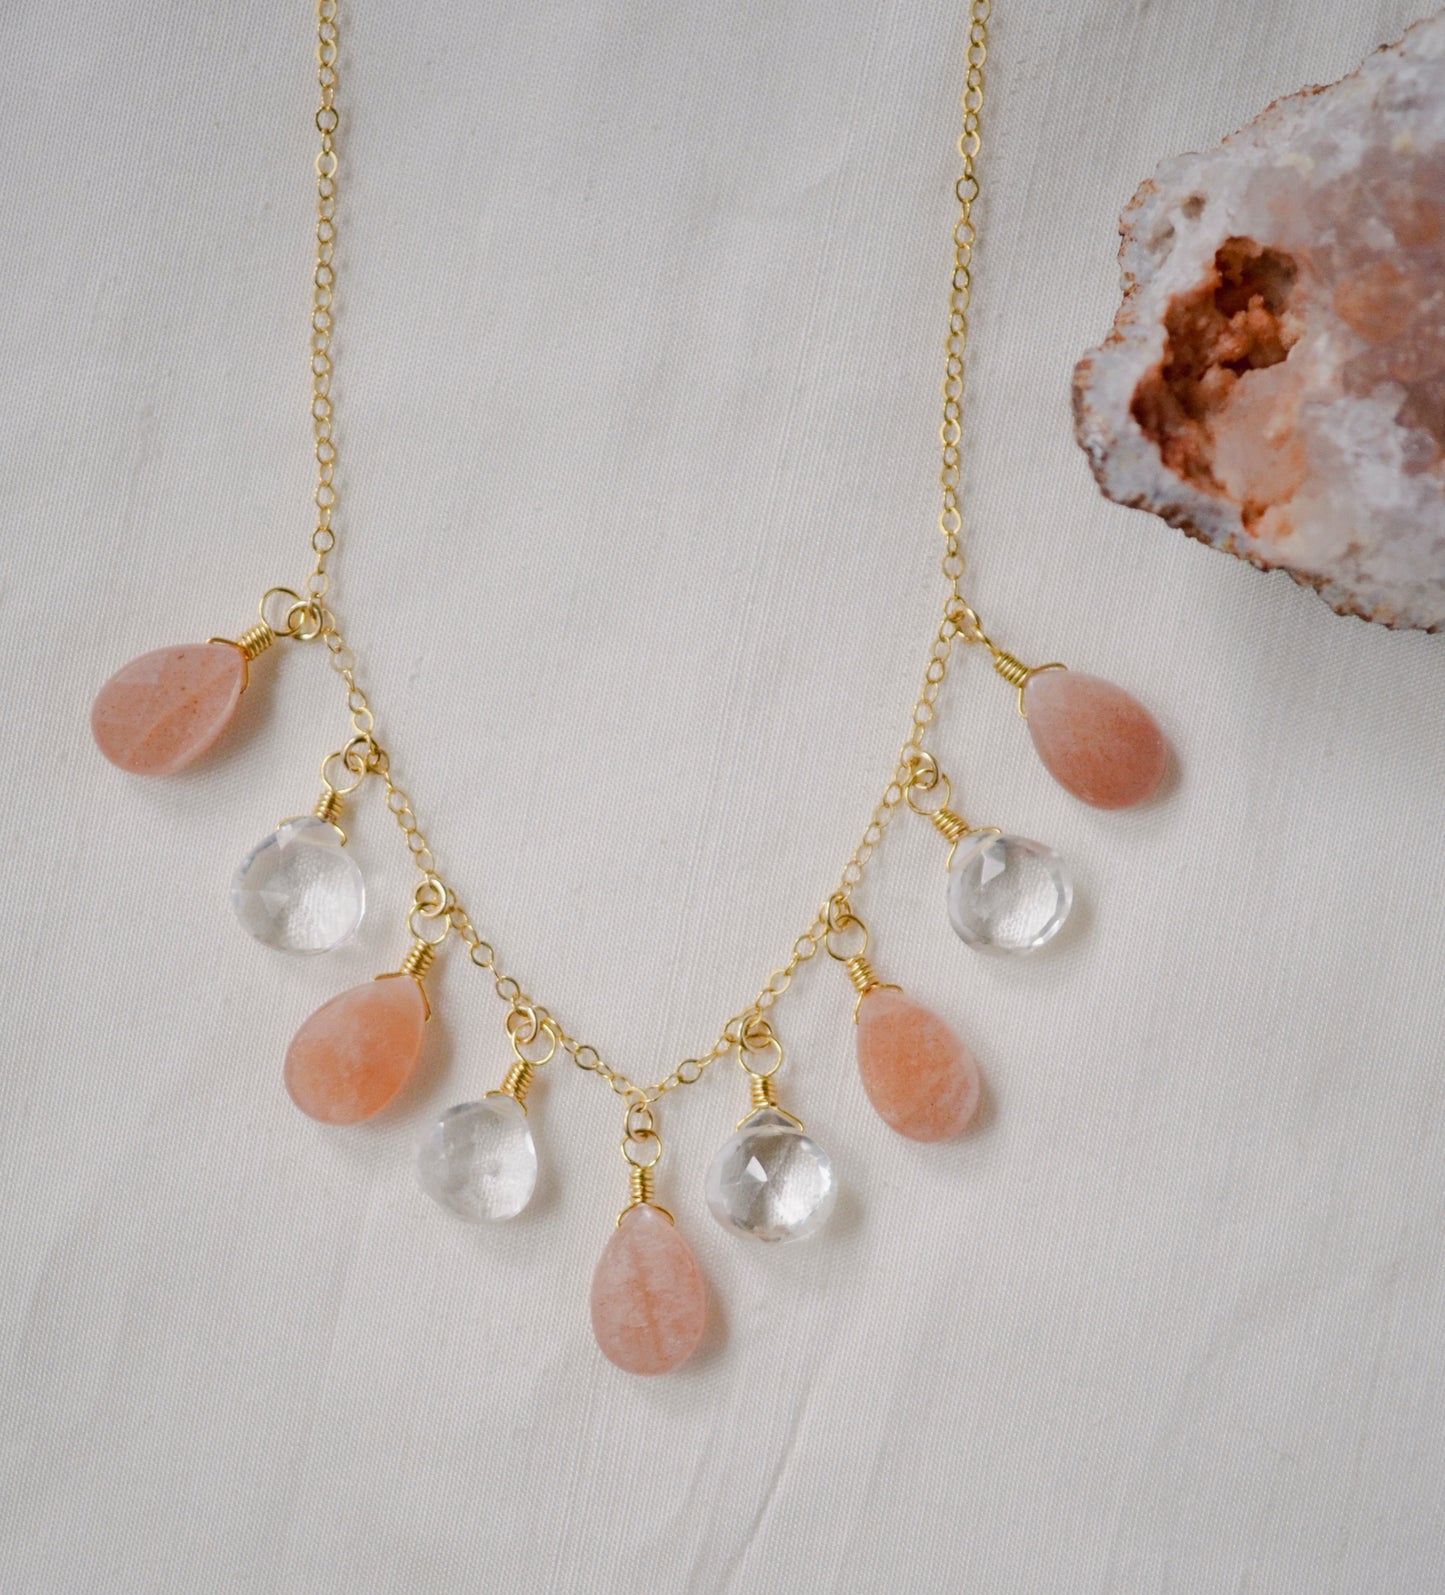 Handmade Necklace. Orange, peach Sunstone and clear Crystal Quartz teardrops dangle off a 14k gold filled chain. 